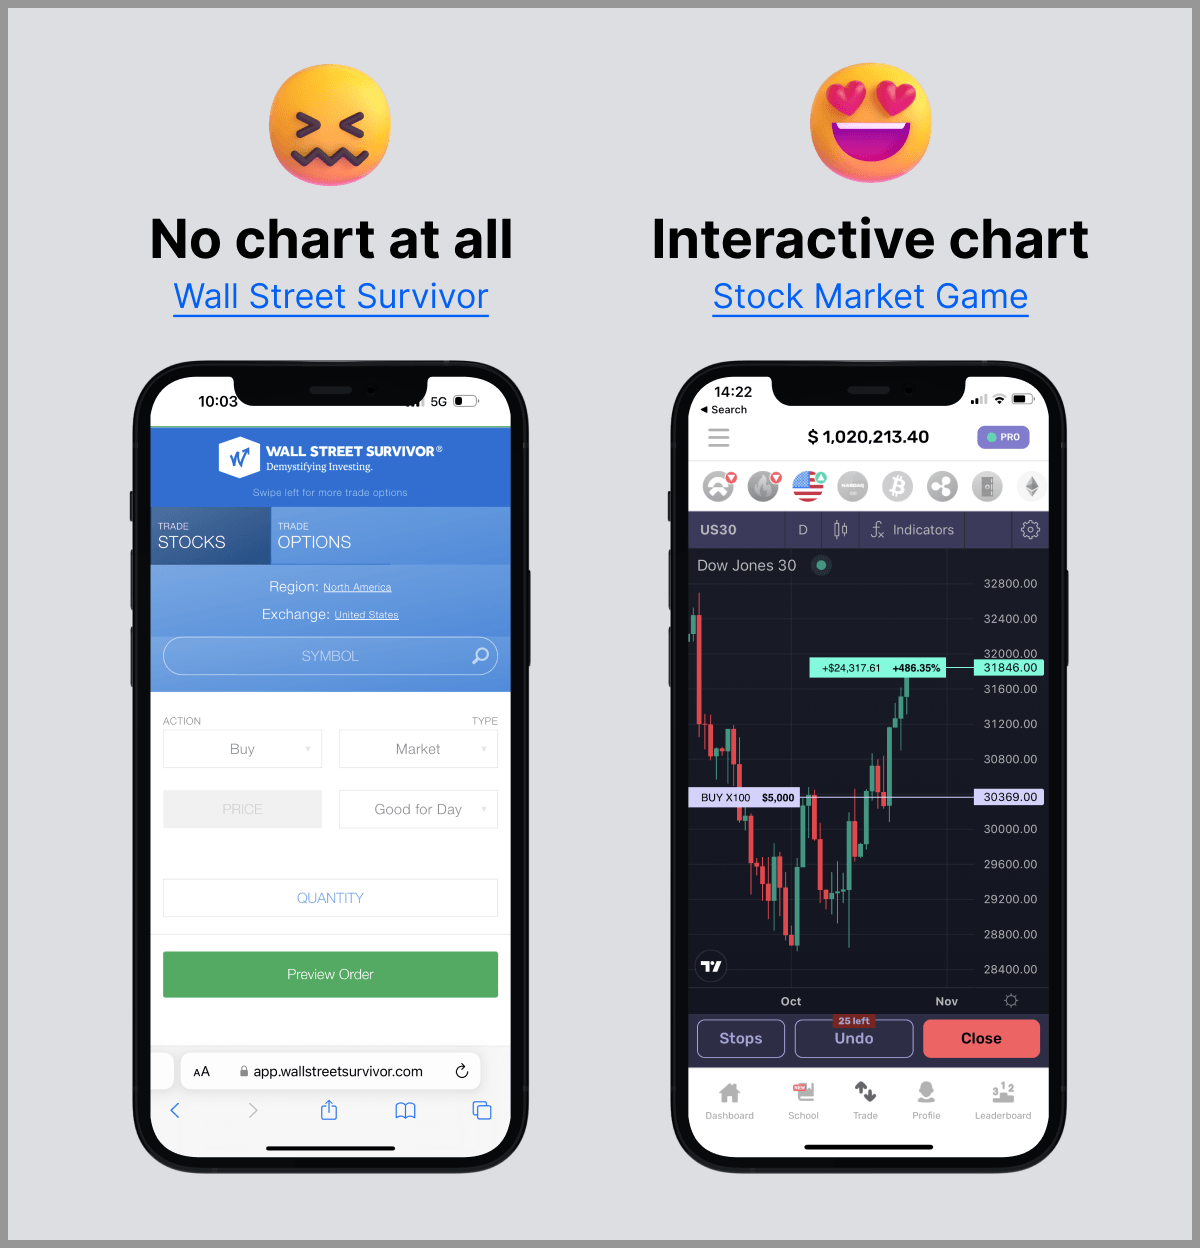 Trading simulator with live charts Vs with No live charts